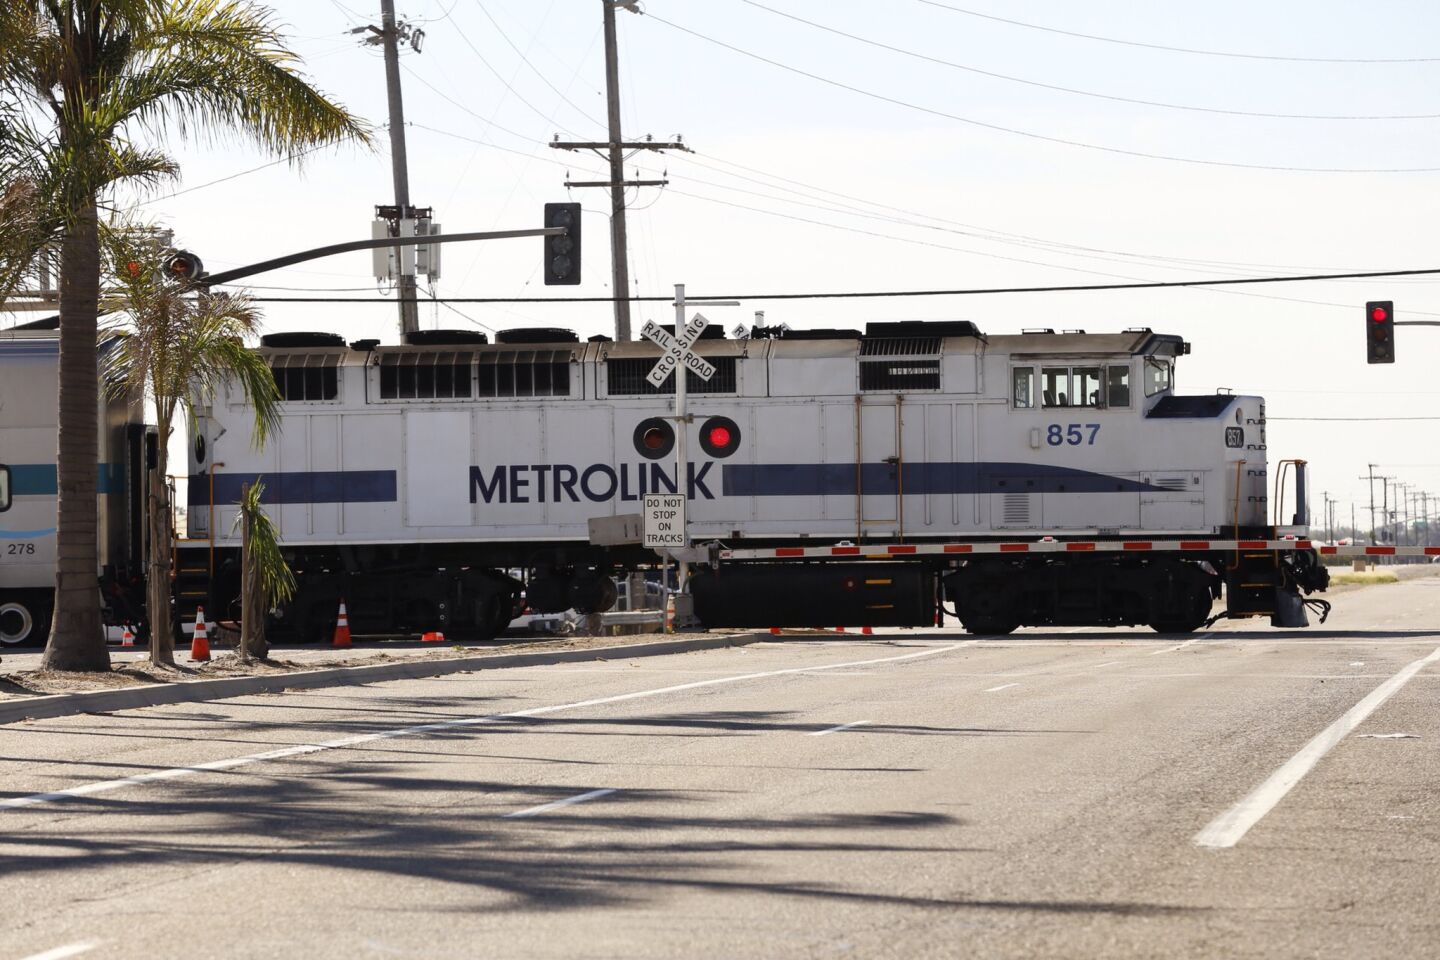 The Metrolink track at the intersection of Rice Avenue and 5th Street in Oxnard was operational Feb. 25.